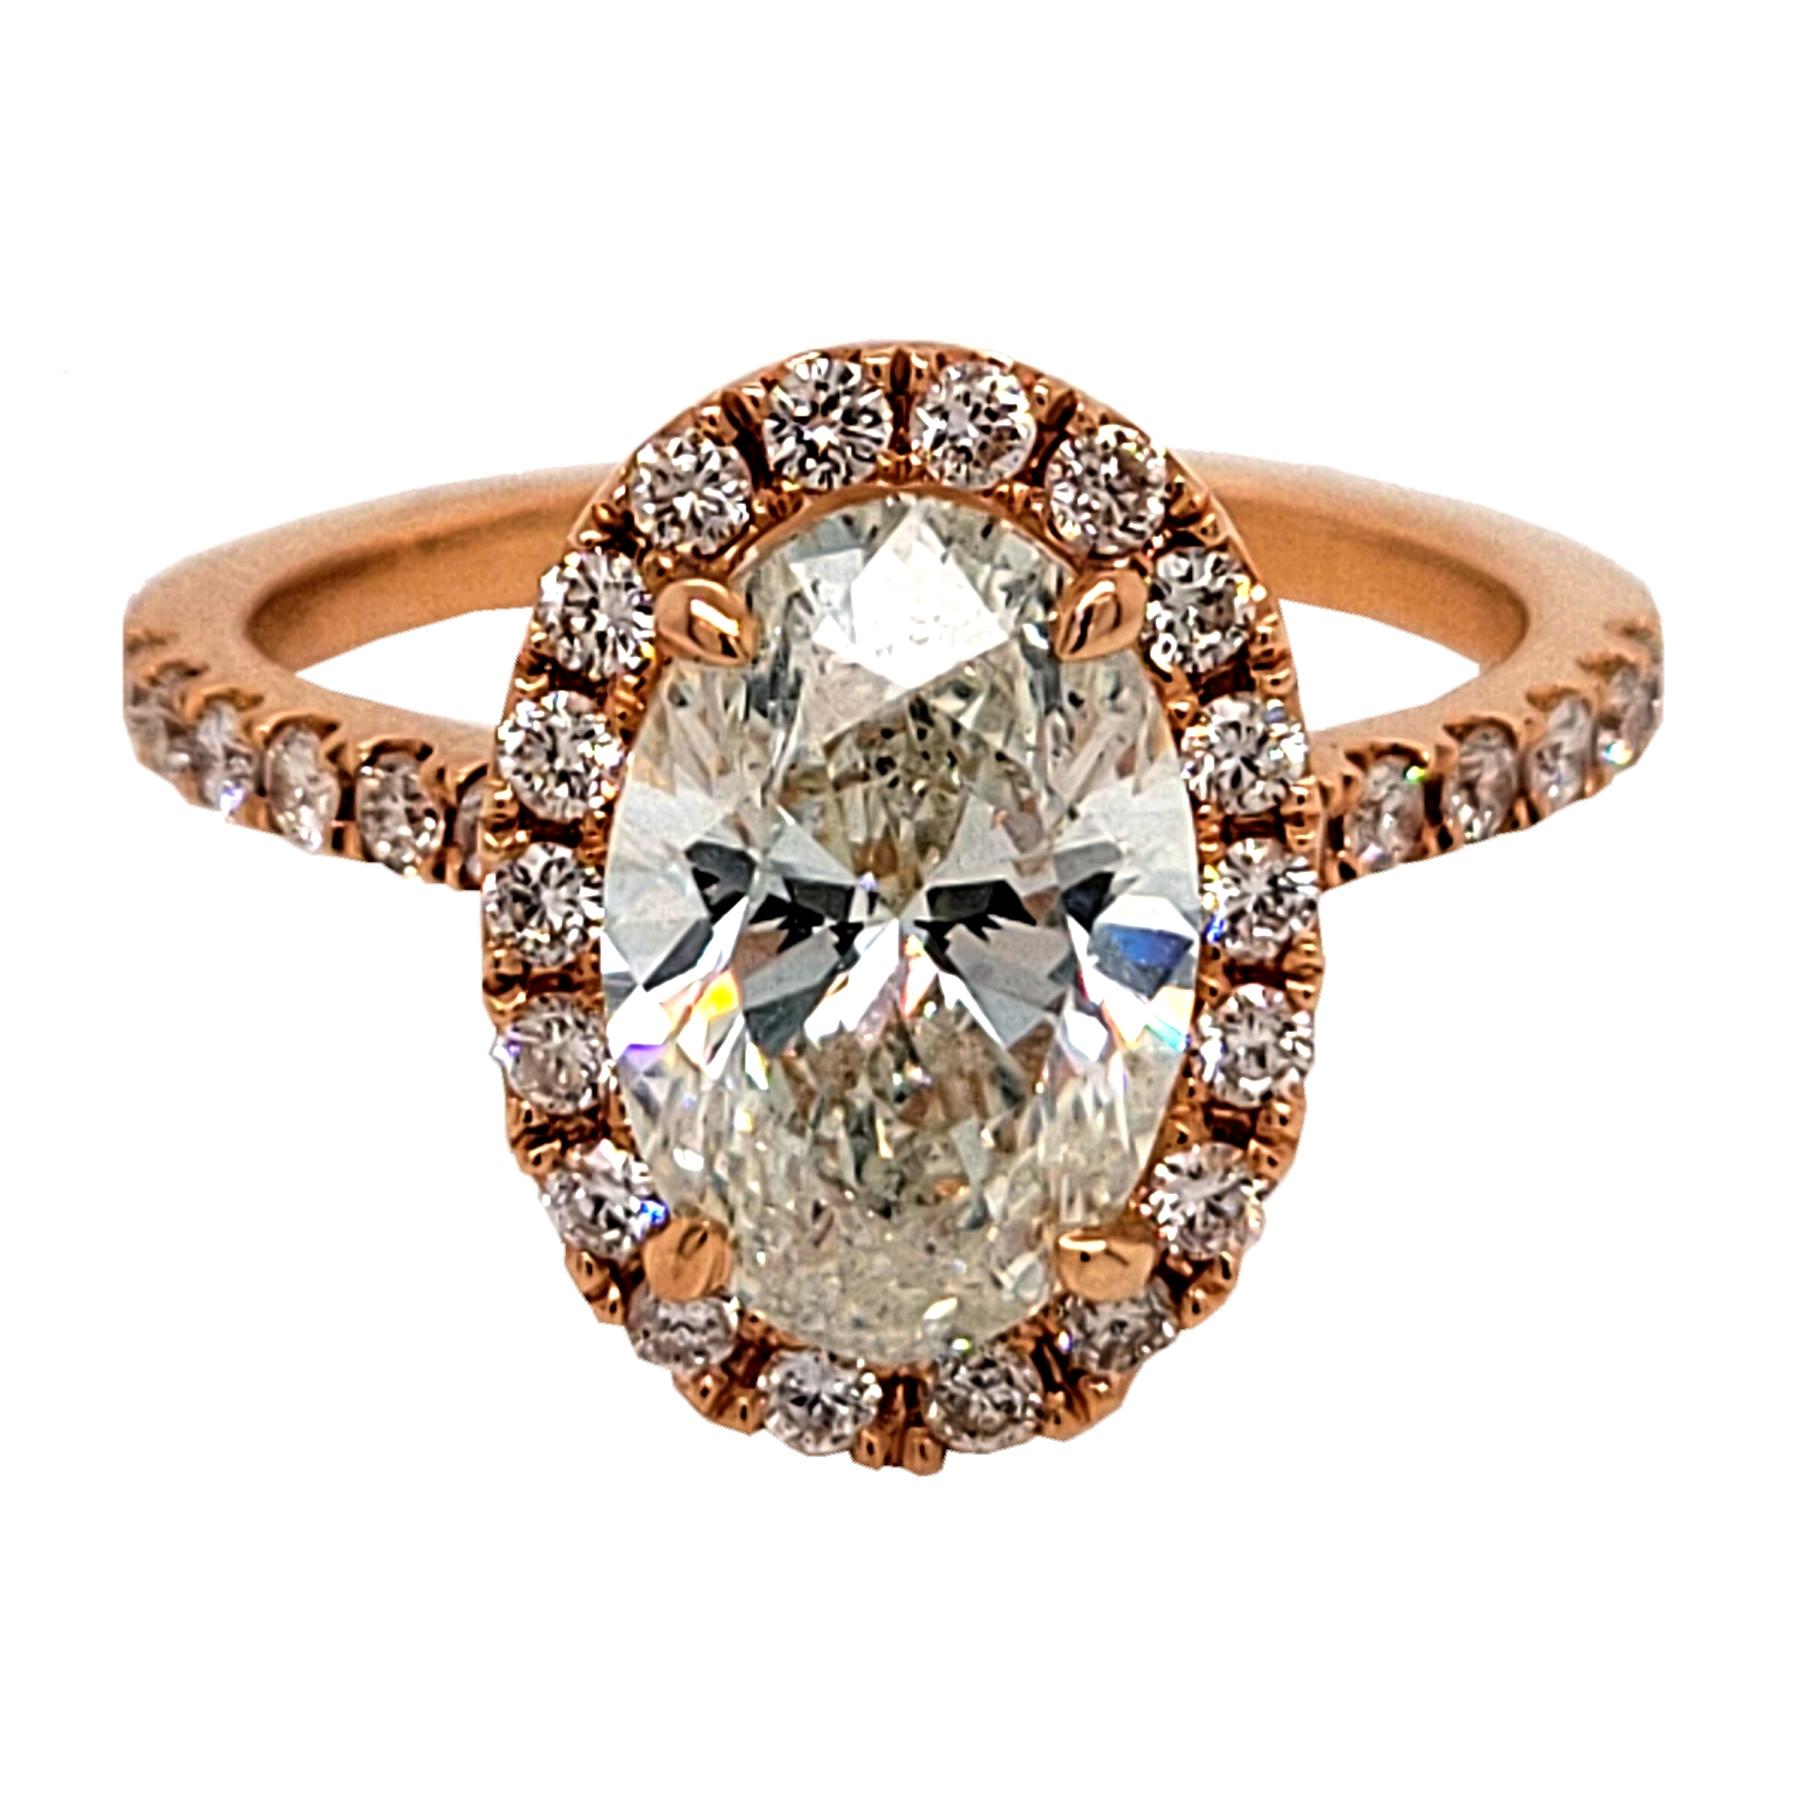 A very fine Oval Shape J/SI1 EGL certified center Diamond set in a fine 18k gold pave set Engagement Ring with Halo and total weight of 0.58 Ct diamonds on the side. 

Diamond specs:
Center stone: 2.20 Ct EGL Certified J/SI1 Oval Shape natural